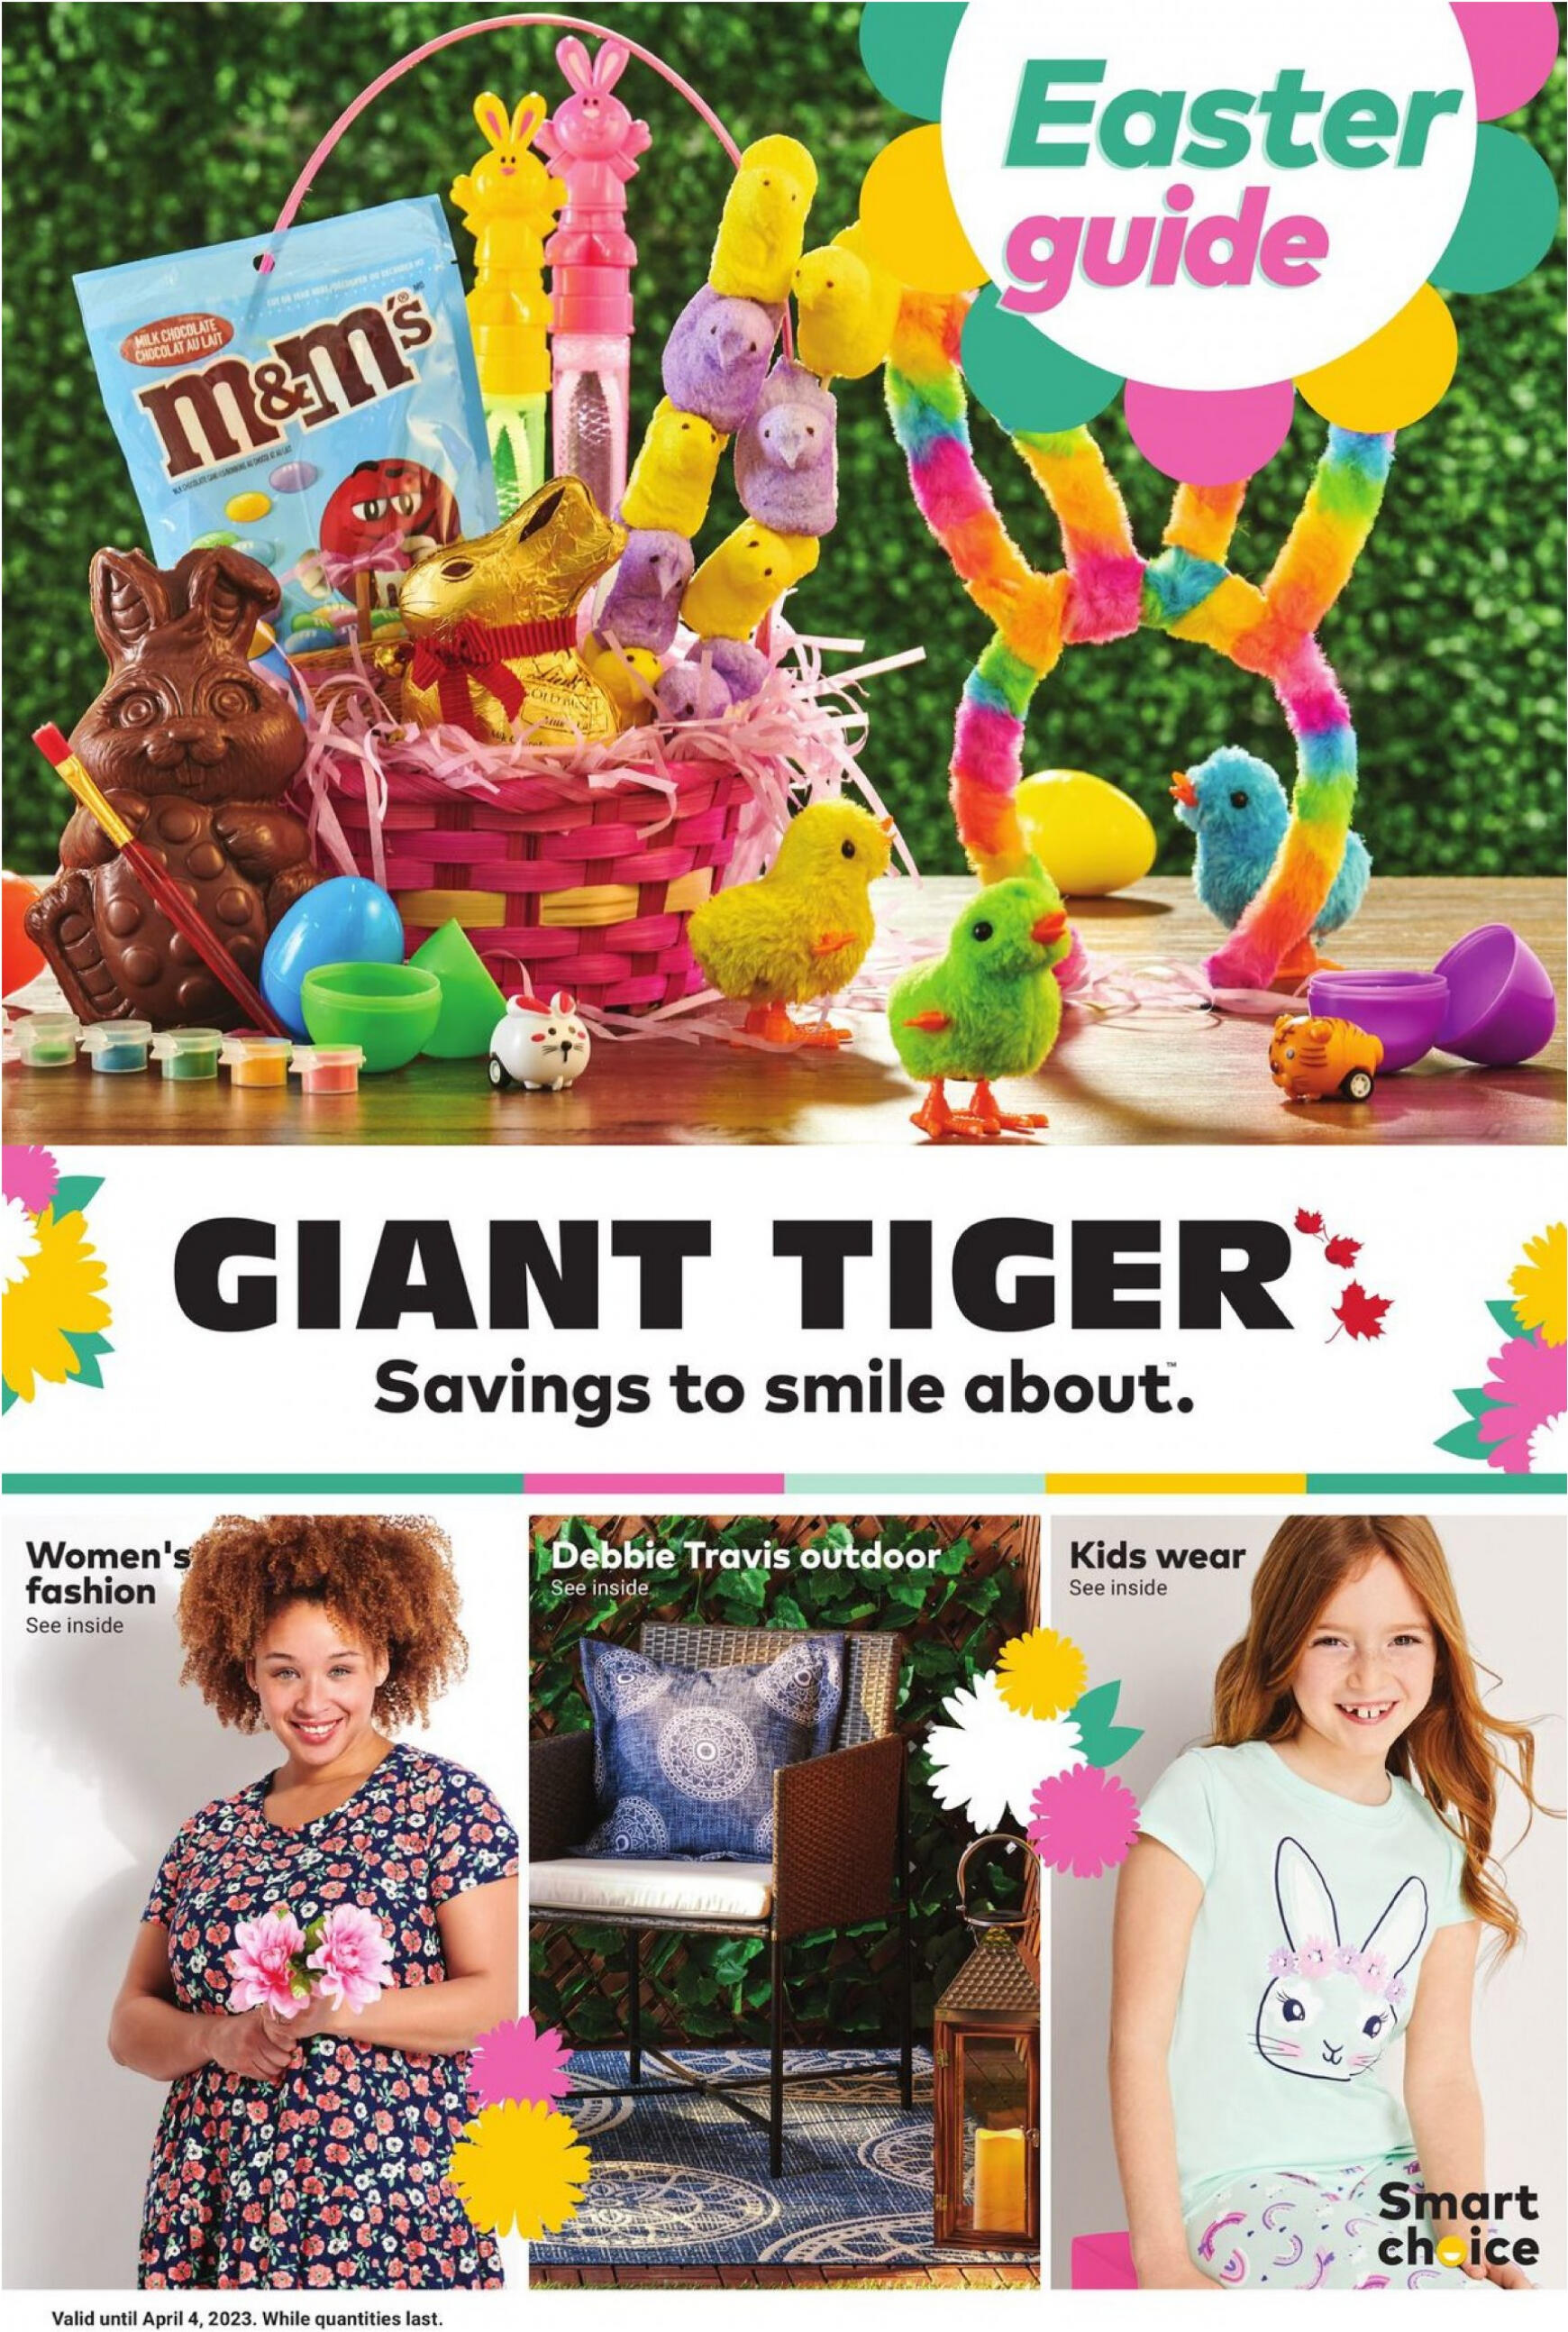 giant-tiger - Giant Tiger Easter guide - page: 1